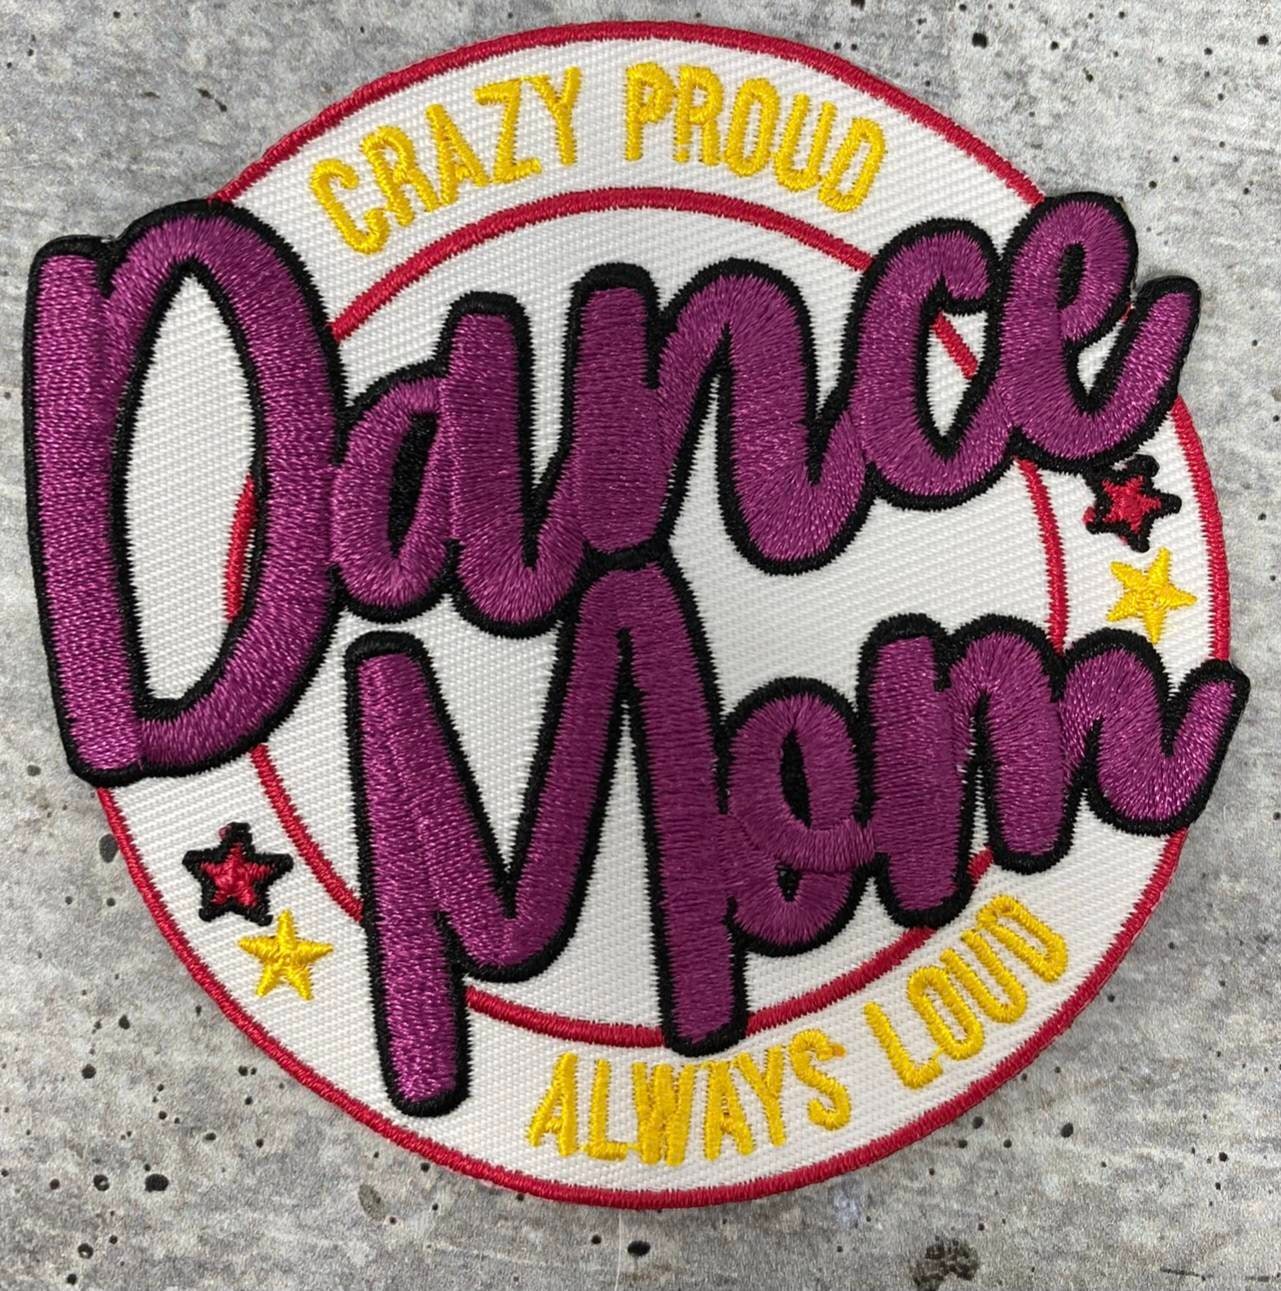 Crazy Proud, Always Loud,"Dance Mom" 1-pc Colorful Patch, Iron-on Patch for Jackets, Hats, & Bags, Size 3", Gift for Mom of Dancer